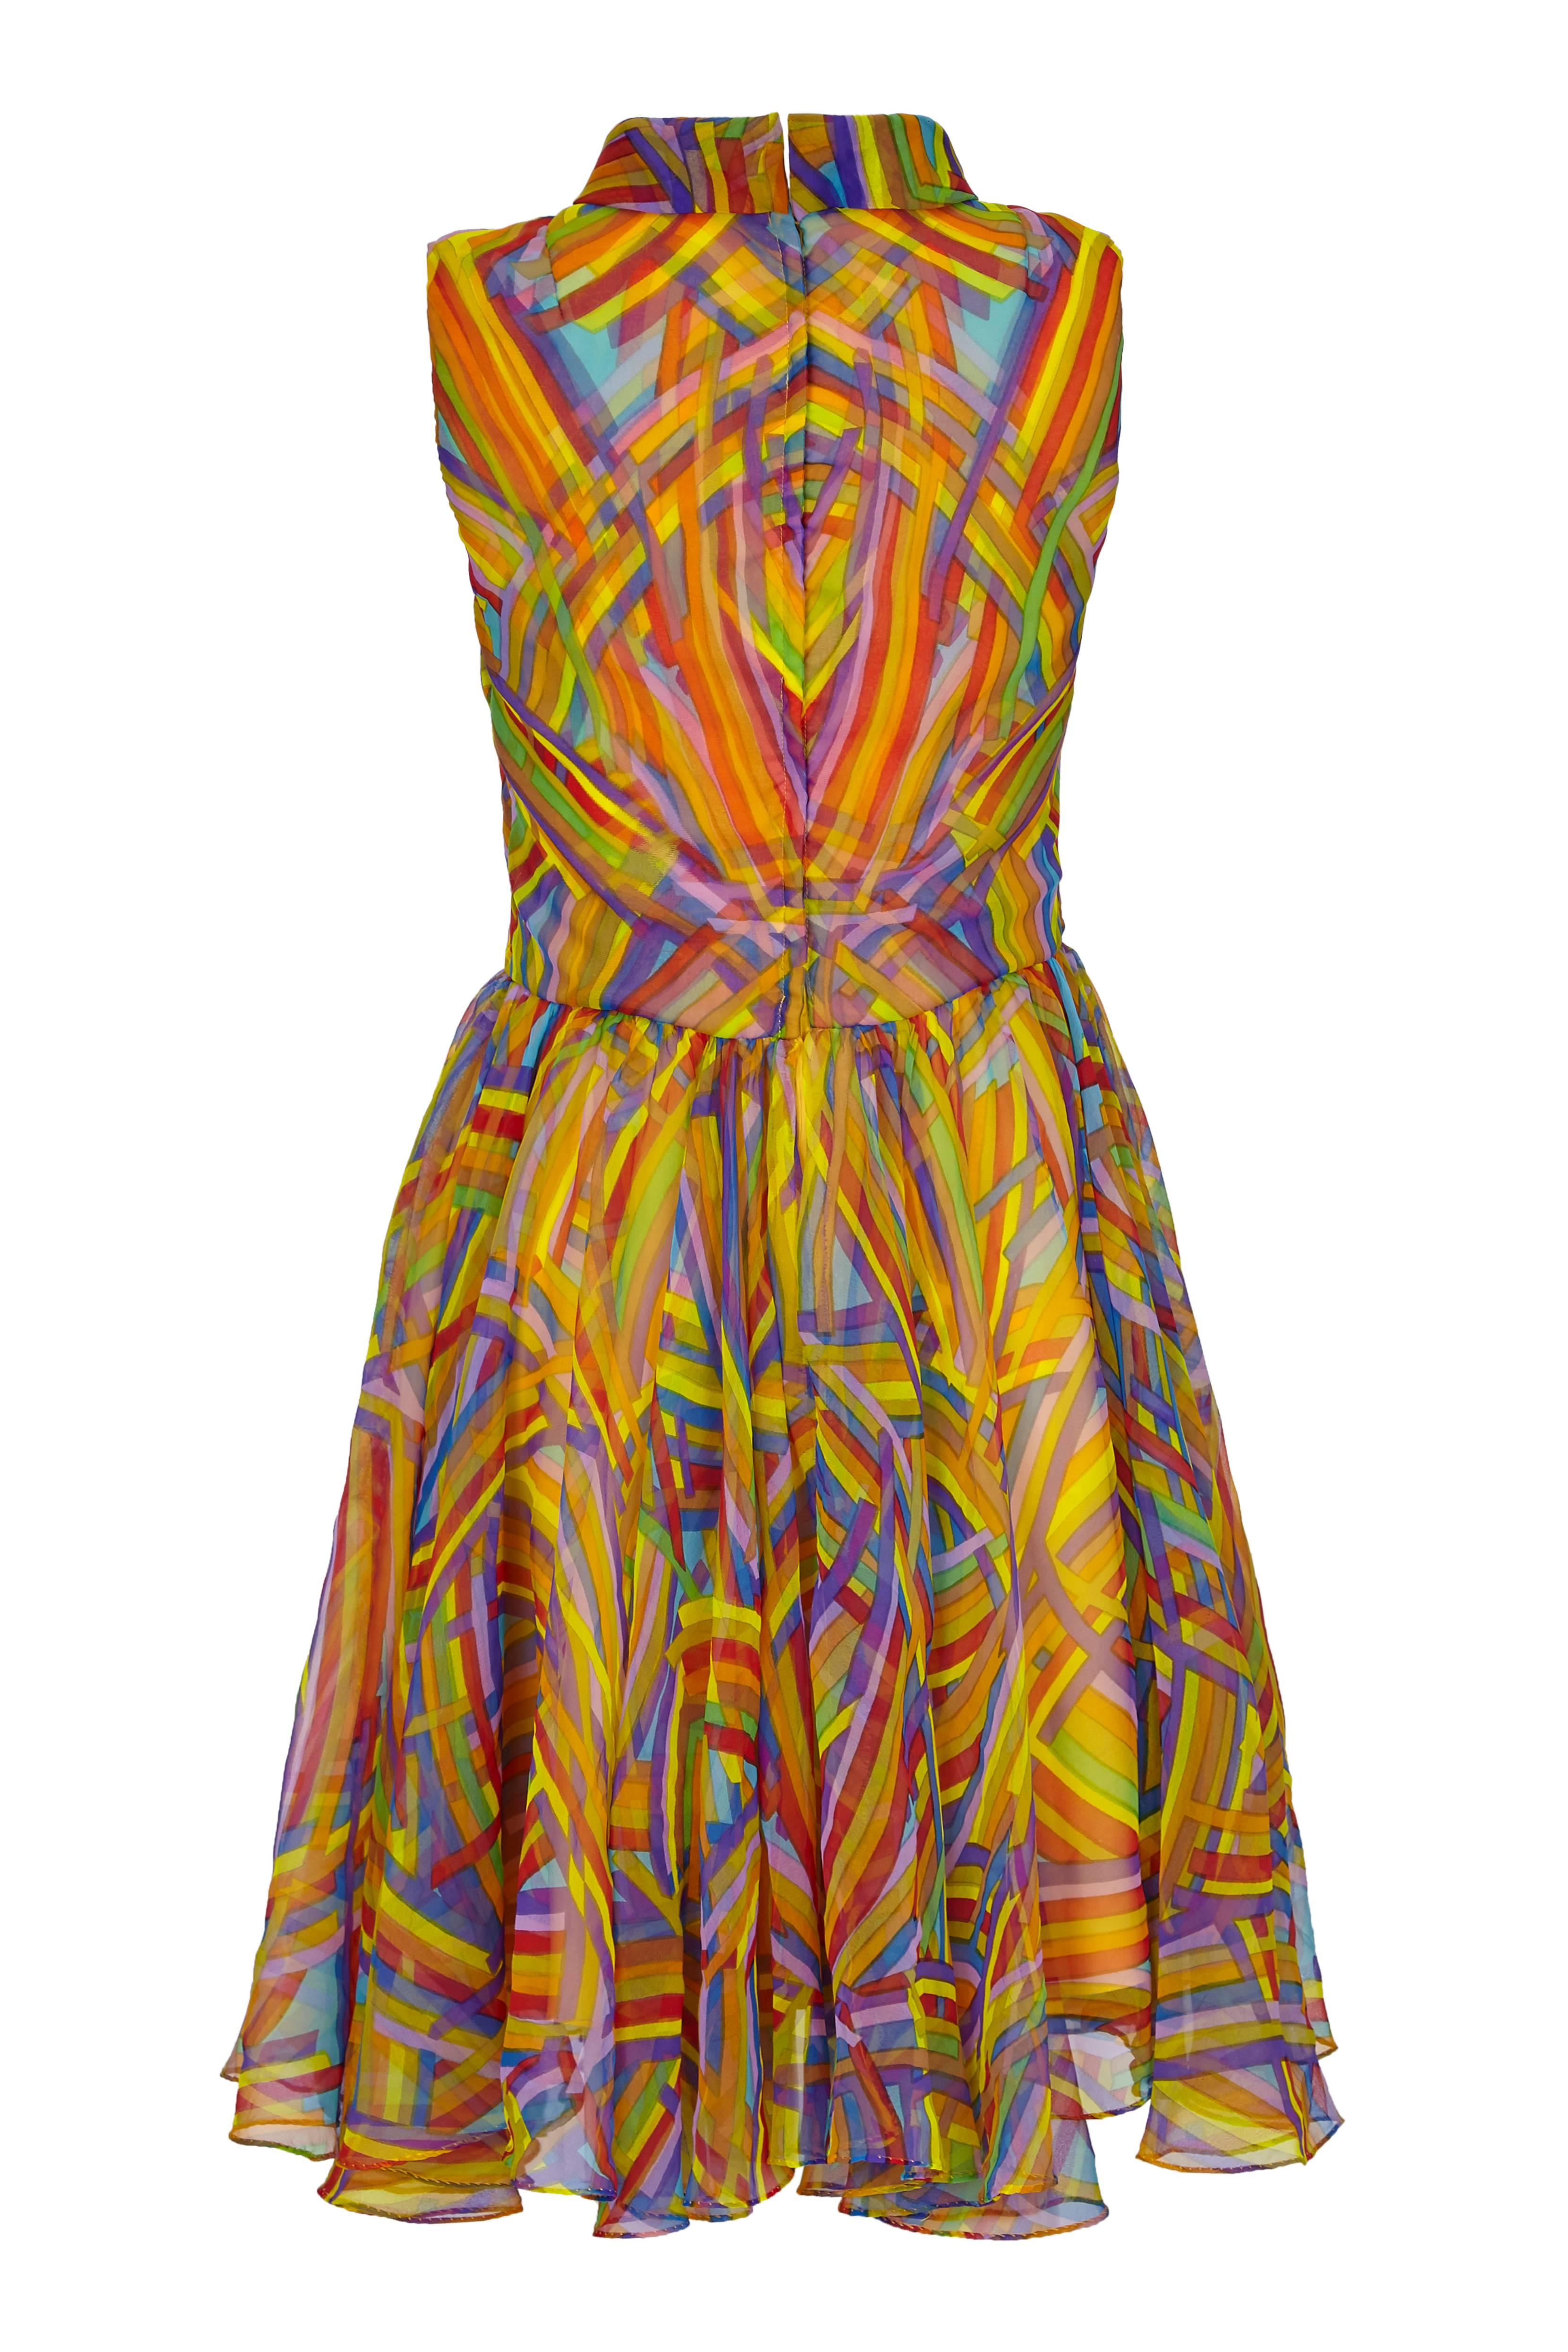 This fantastic vintage 1960s Jack Bryan multi-coloured printed silk chiffon mini dress is playful, vivacious and in excellent vintage condition. The dress is a simple shift cut featuring a roll neck, gathered waistband and a full circle knee length